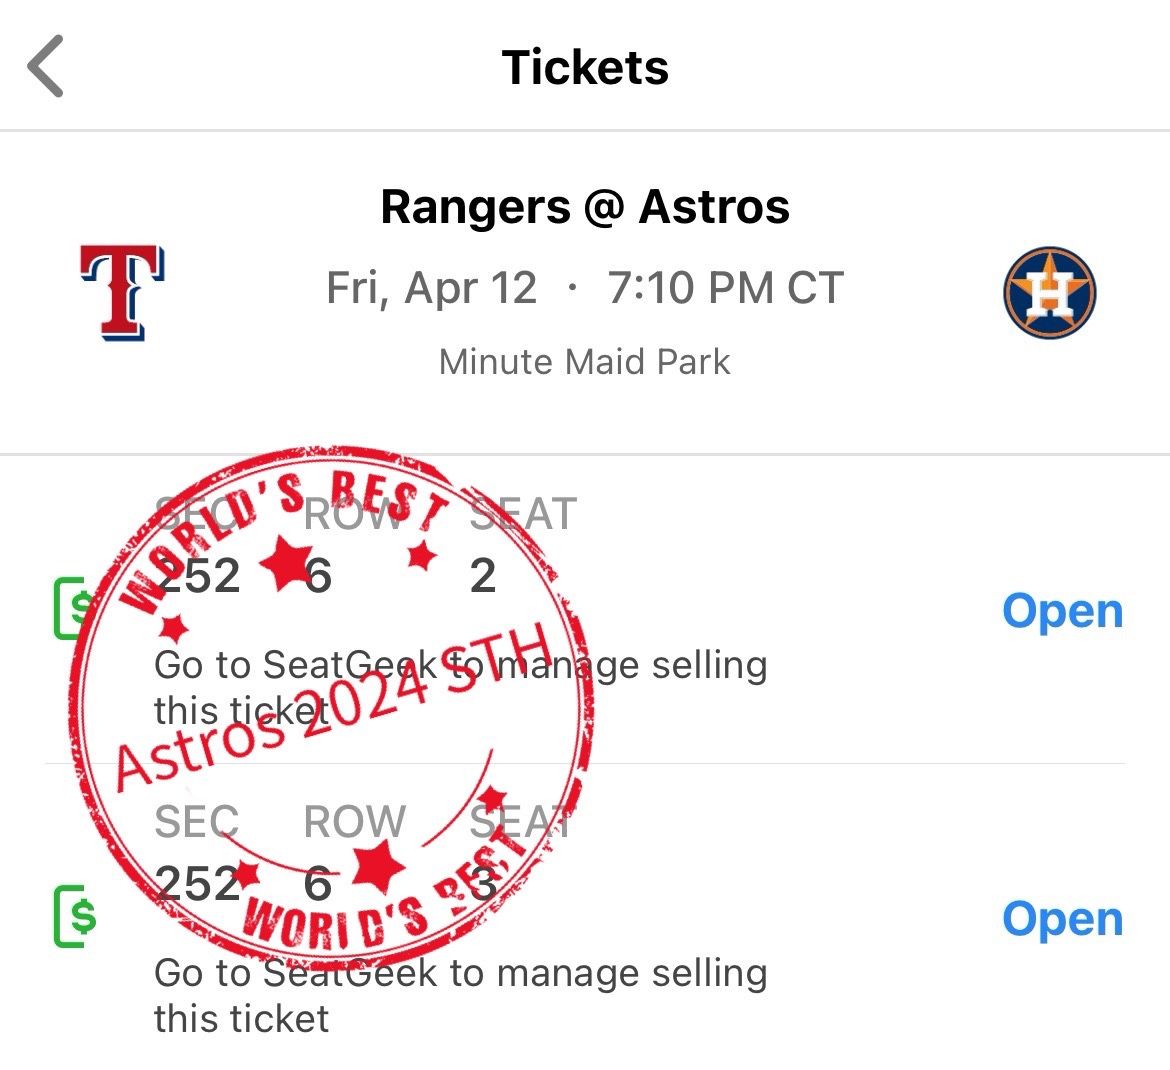 Astros vs Rangers 1st Home Game 4/12 7:10pm Section 252 Row 6 Seat 2-3, STH early entry, Jose Altuve Jersey Giveaway